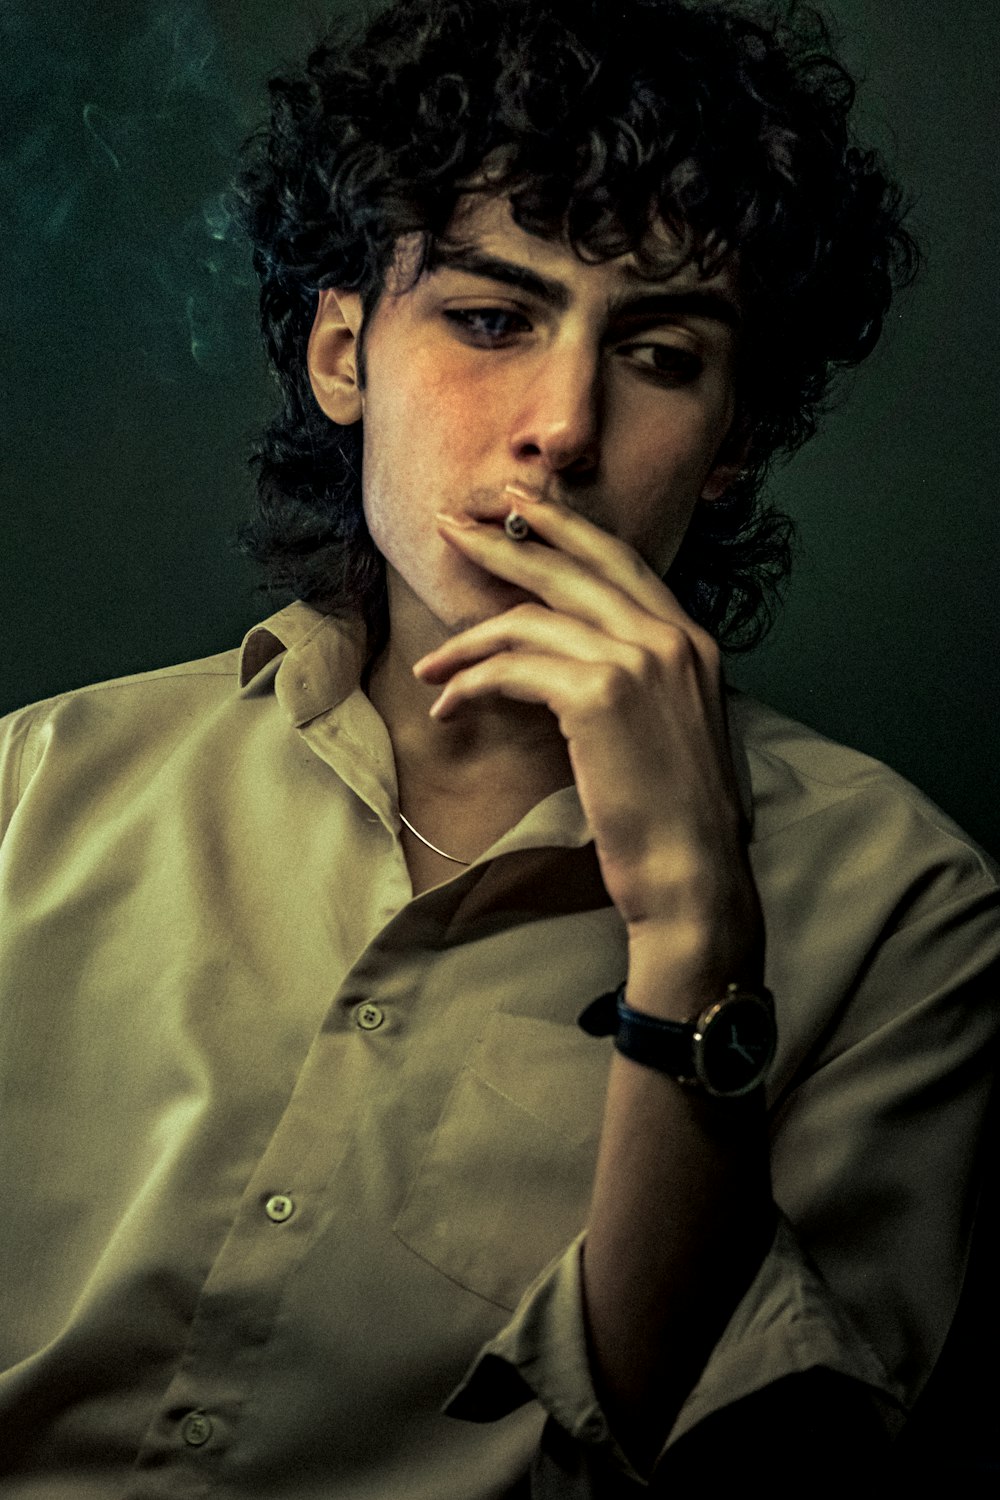 a man with curly hair smoking a cigarette